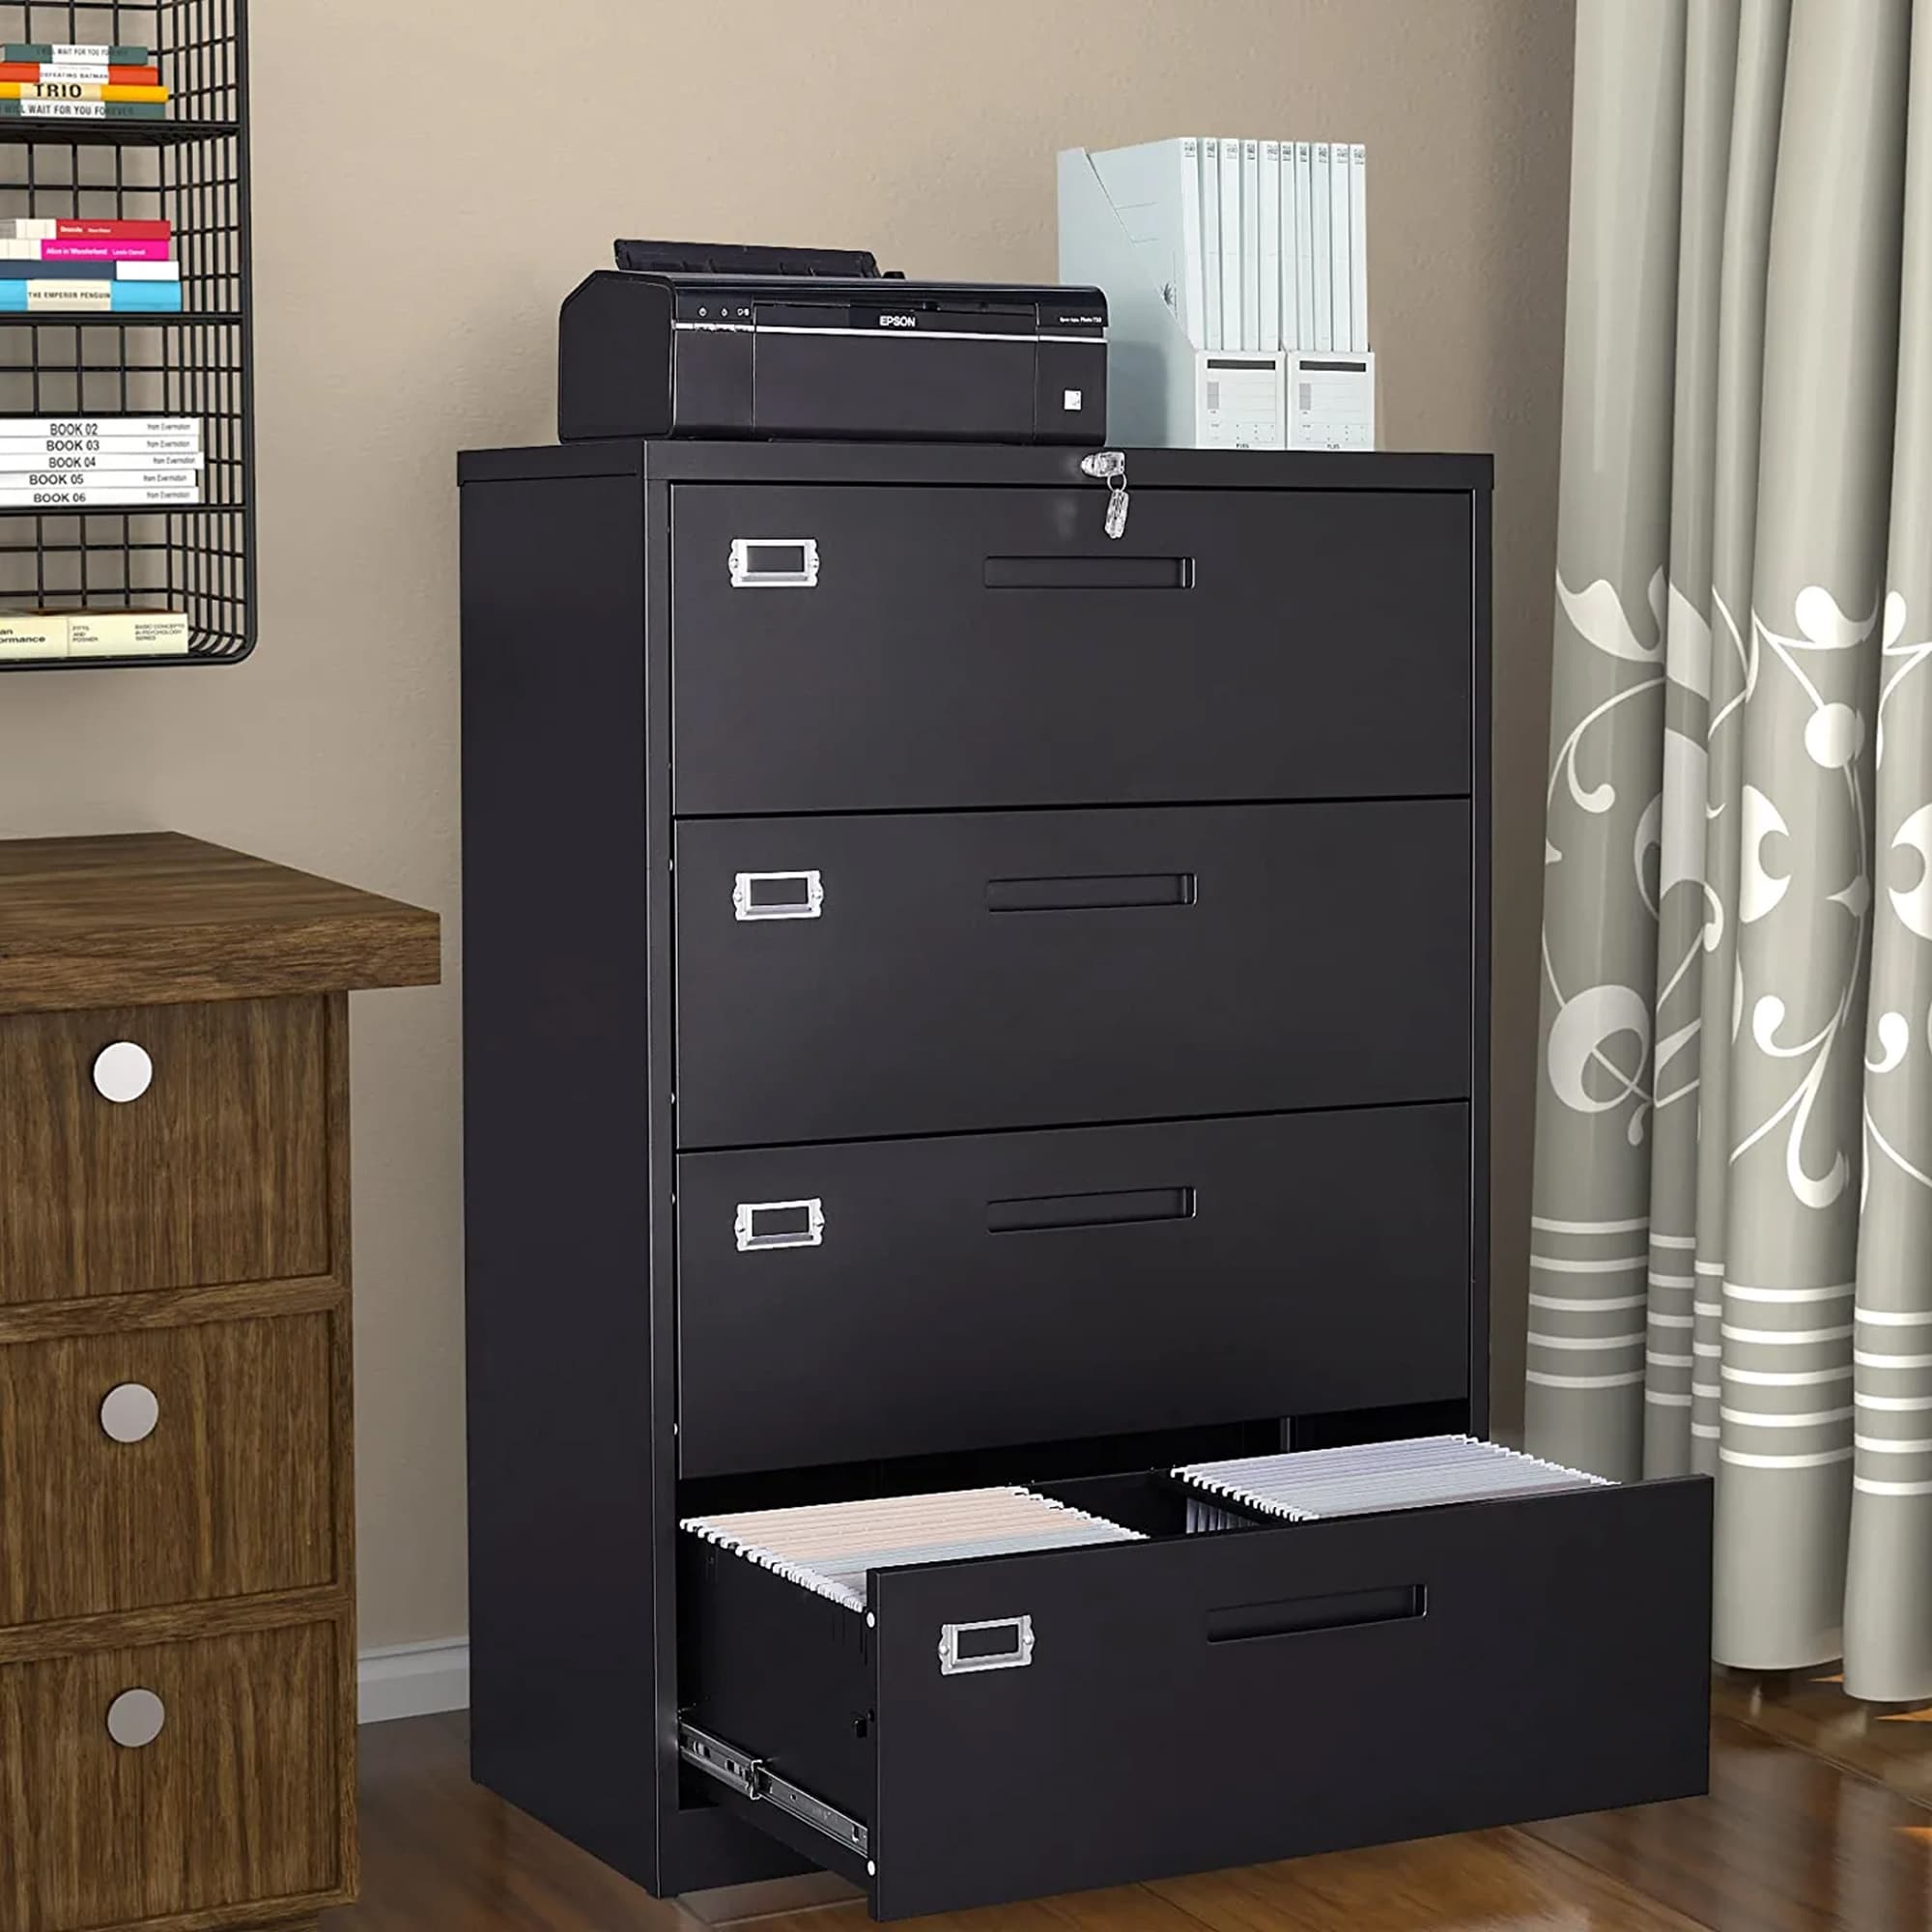 https://ak1.ostkcdn.com/images/products/is/images/direct/c986361126f4a53db18e4f72993a34050552afc4/4-Drawer-Steel-File-Cabinet-Filing-Organization-Storage-Cabinets-with-Lock.jpg